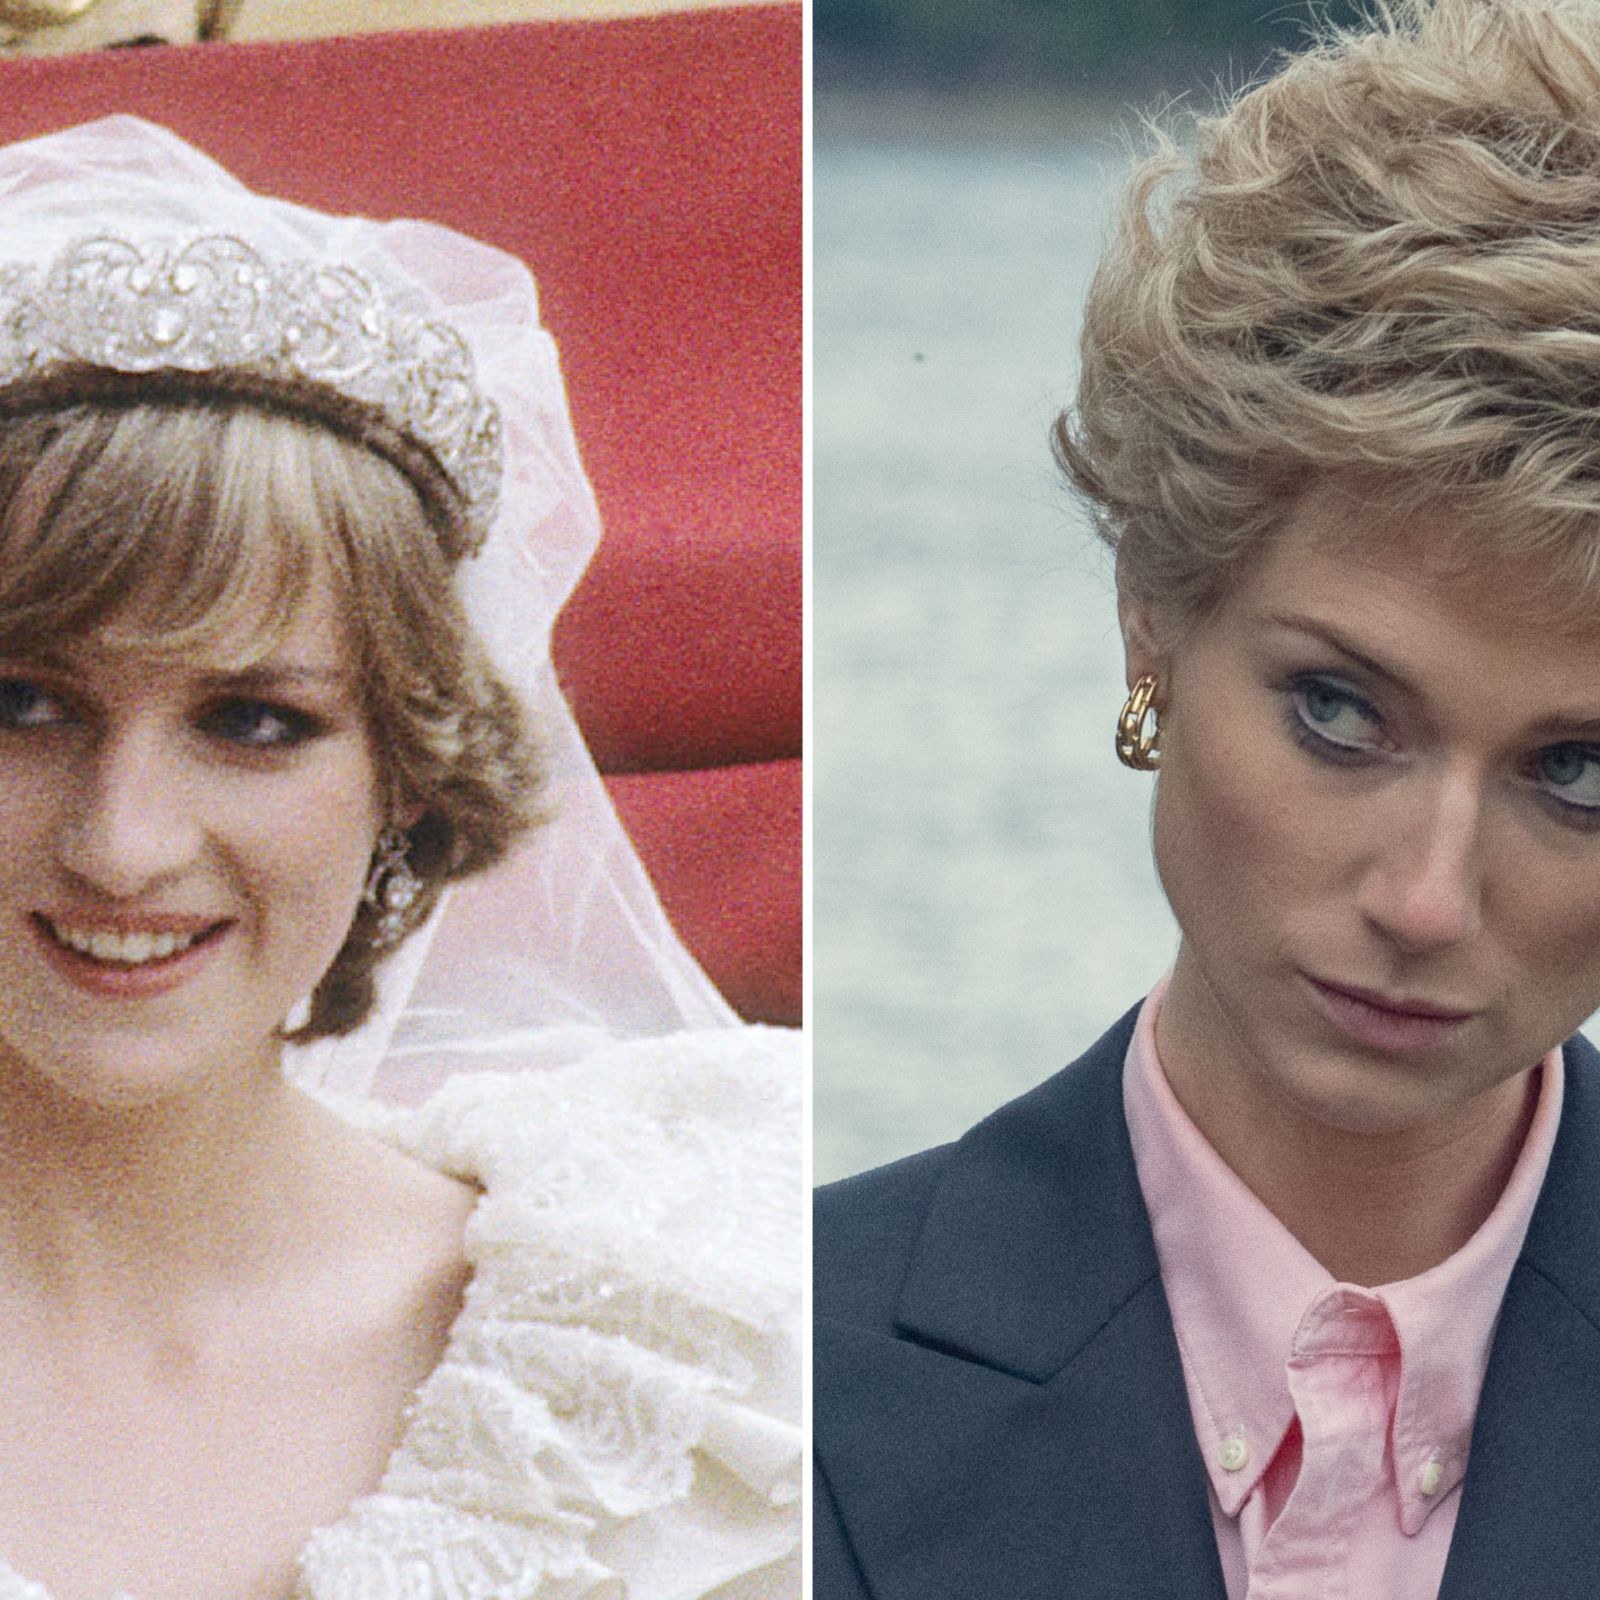 11 Actors Who Have Played Princess Diana On Screen Variety | vlr.eng.br